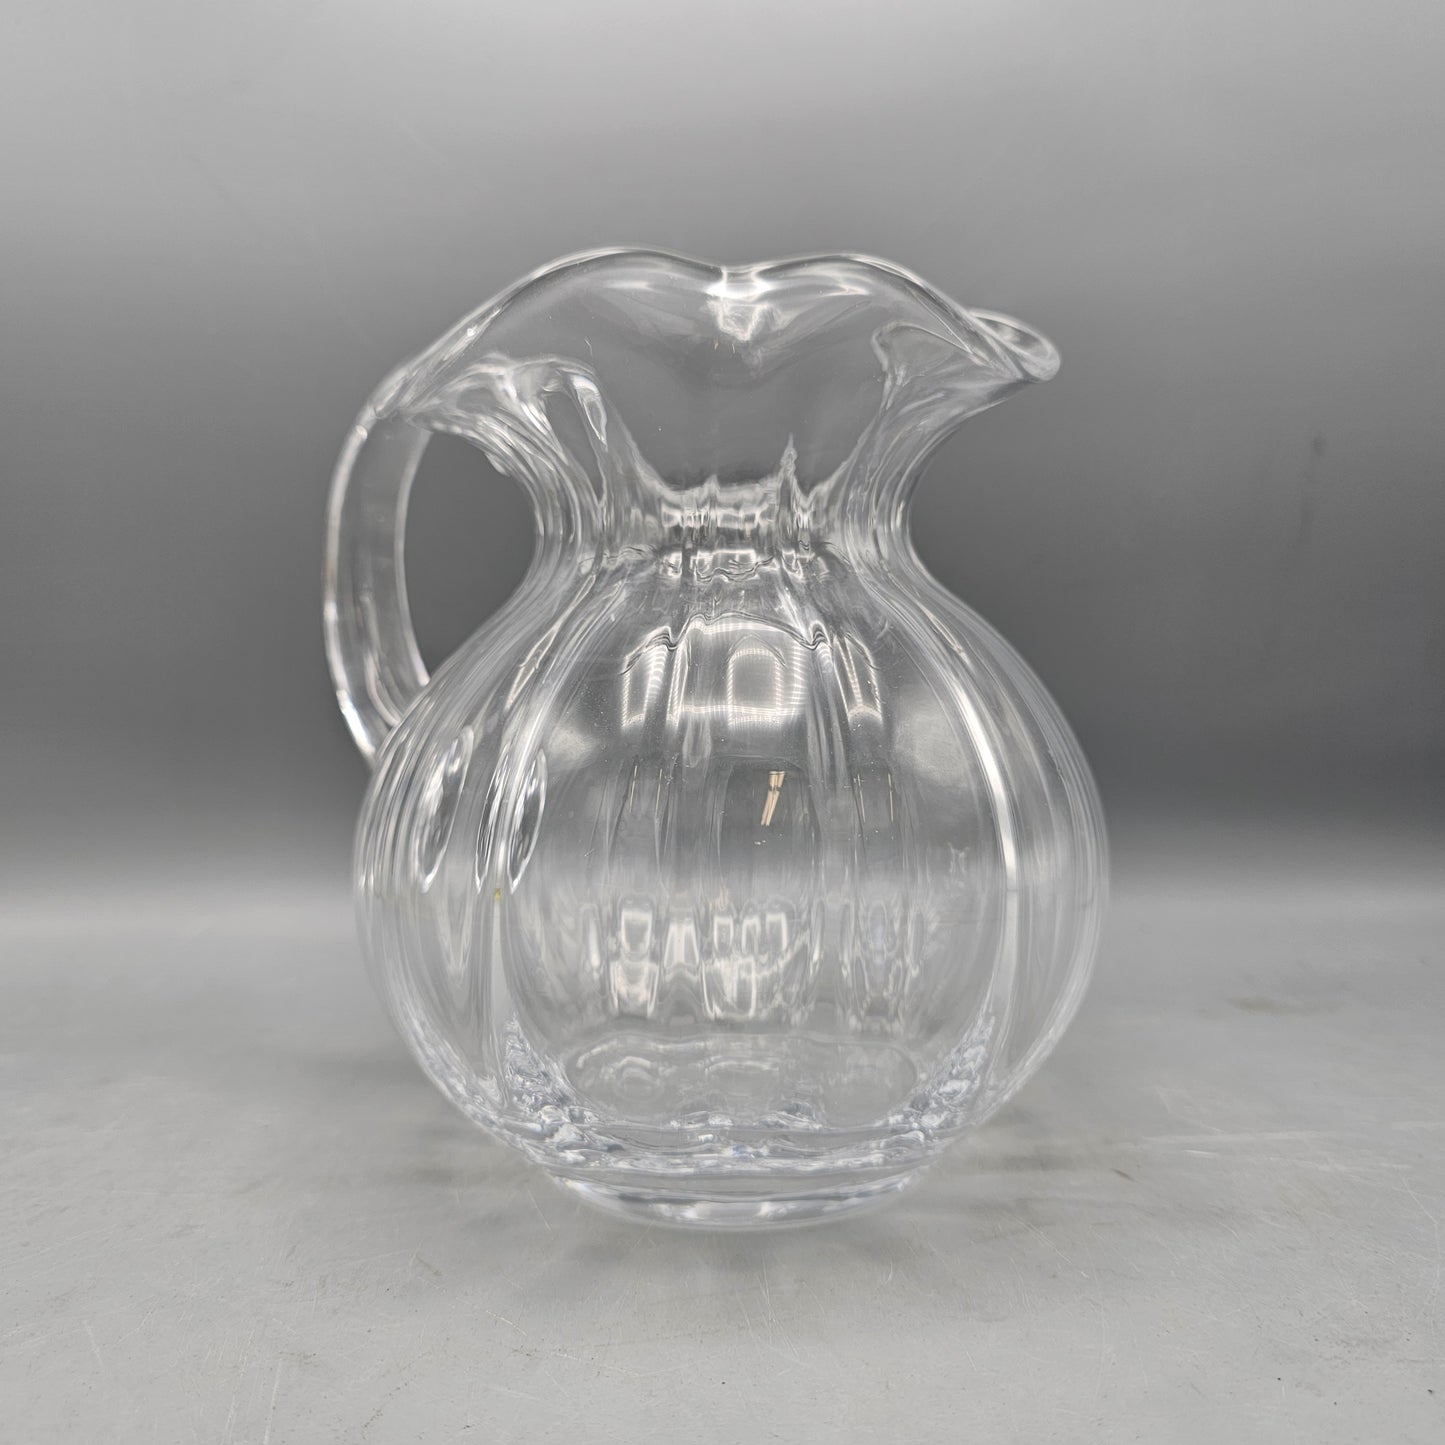 Vintage Hand Blown Glass Pitcher with Ruffled Edge and Ribbed Design